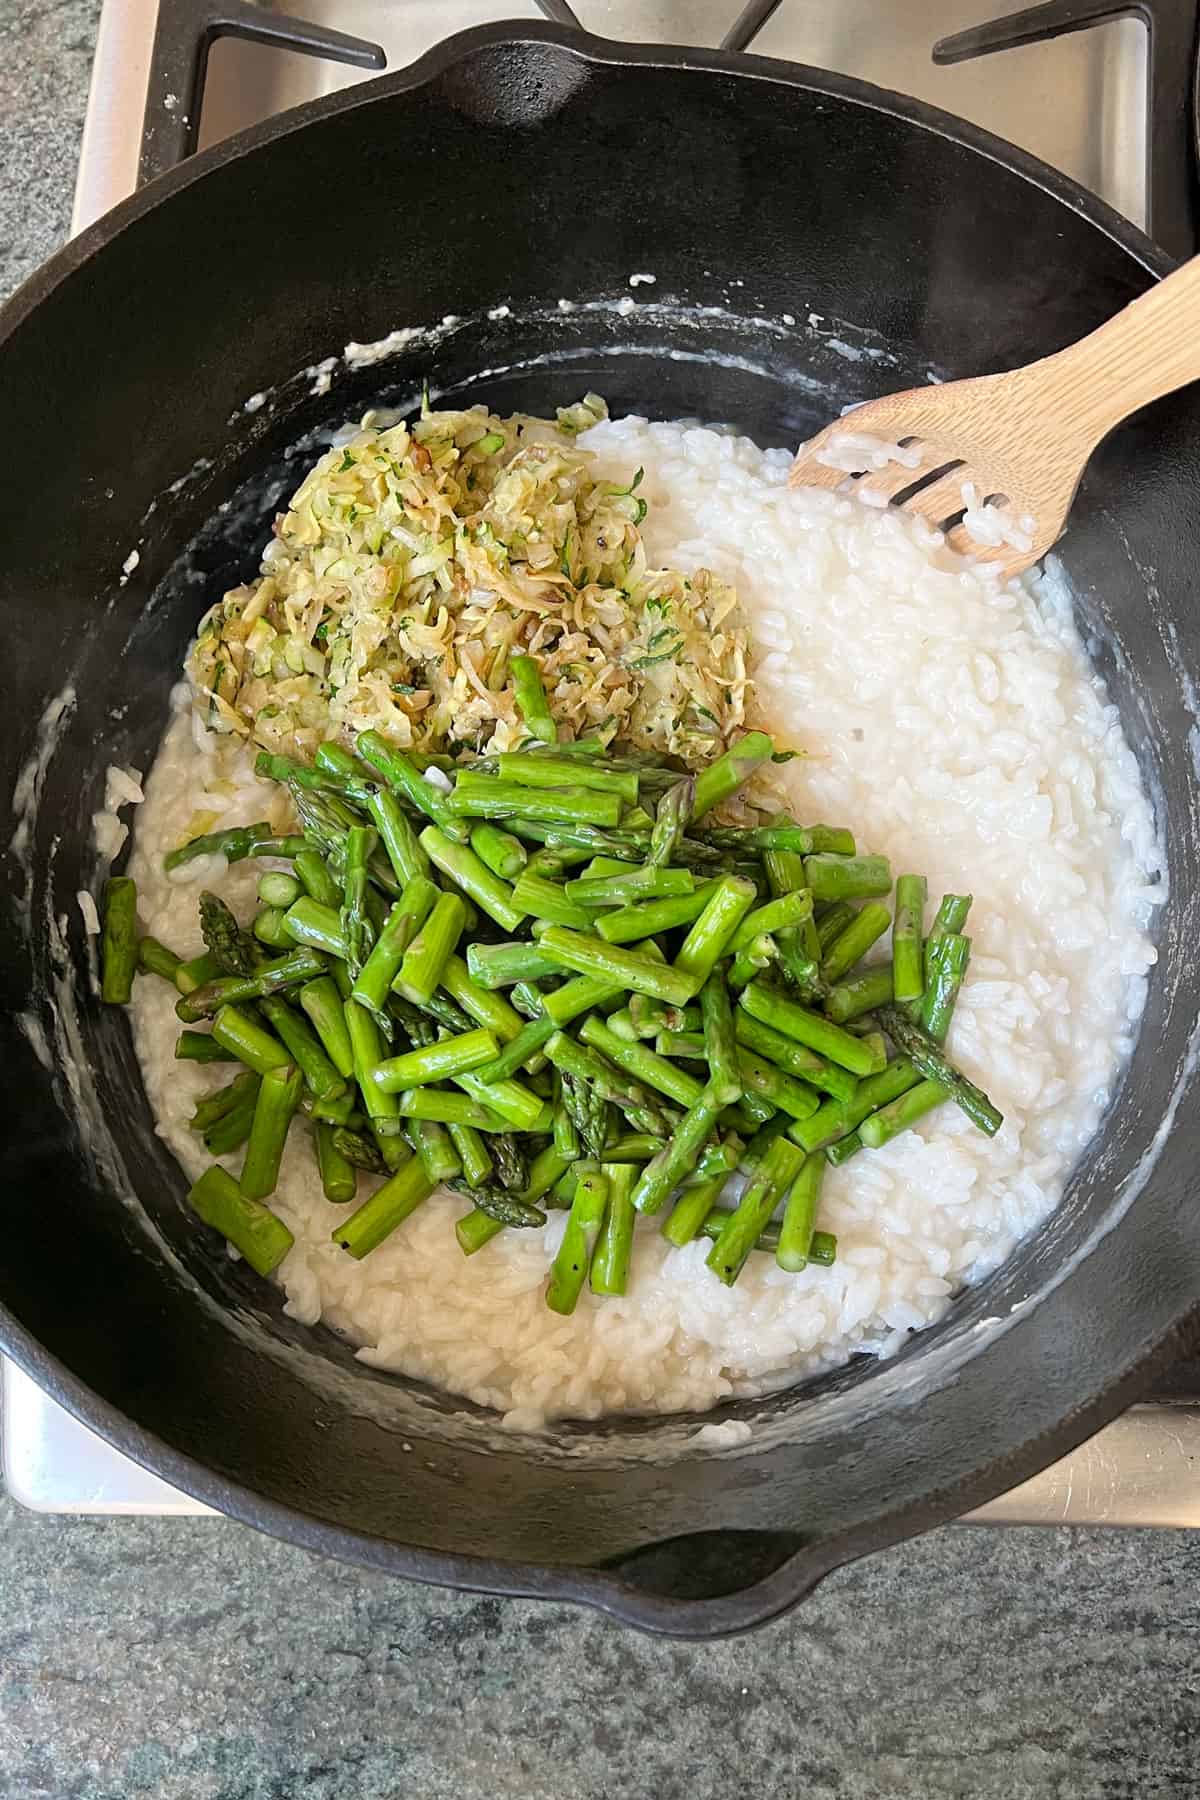 shredded sautéed zucchini and sautéed asparagus added on top of creamy risotto rice in a large Dutch oven